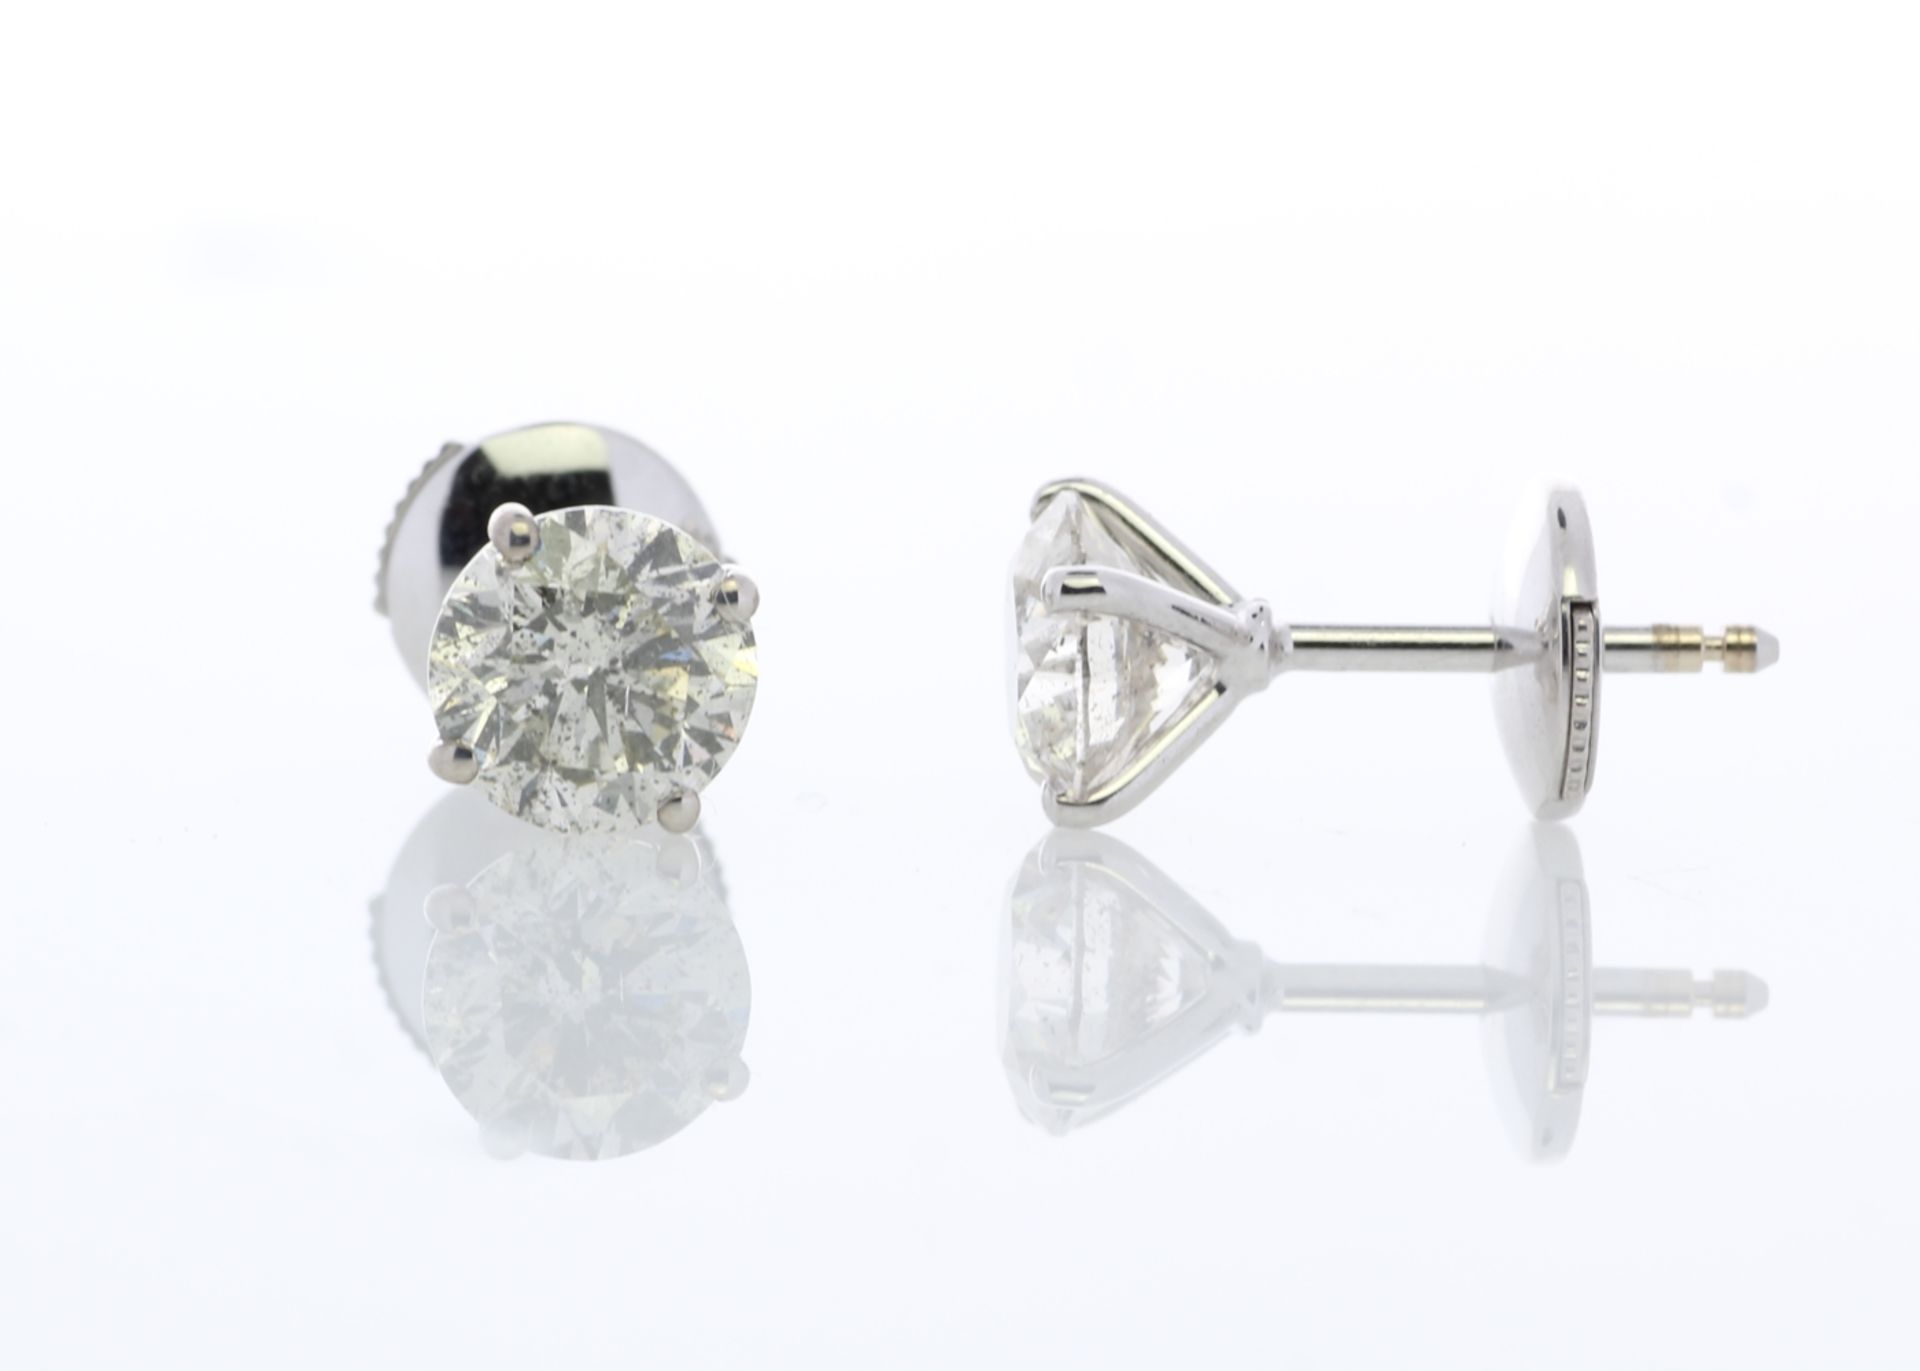 18ct White Gold Single Stone Claw Set Diamond Earring 2.34 Carats - Image 2 of 4